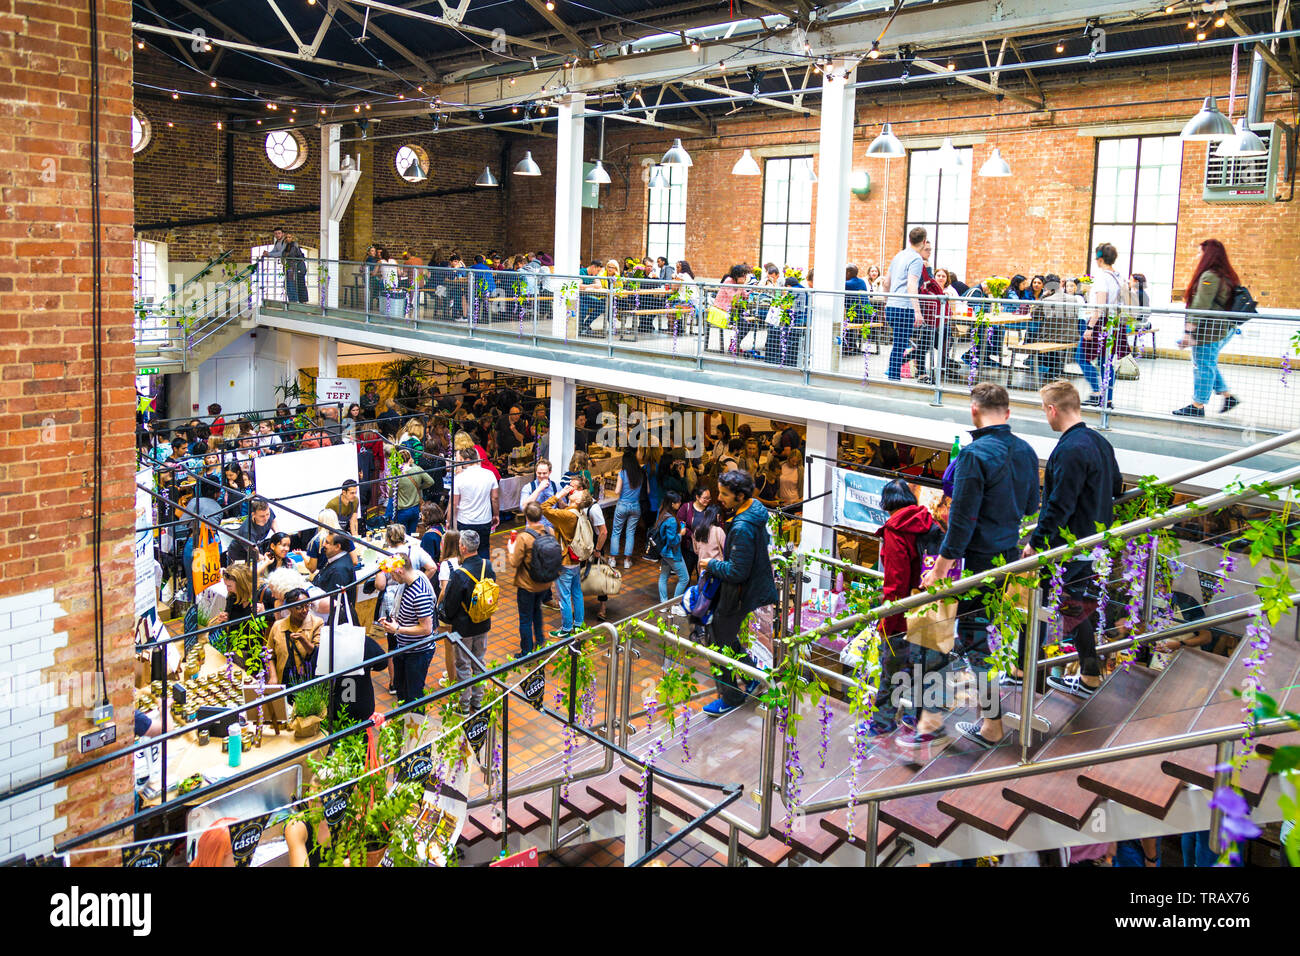 27th May 2019 - People visiting the Free From Festival for gluten-free and low sugar products, Boiler House, Brick Lane, London, UK Stock Photo